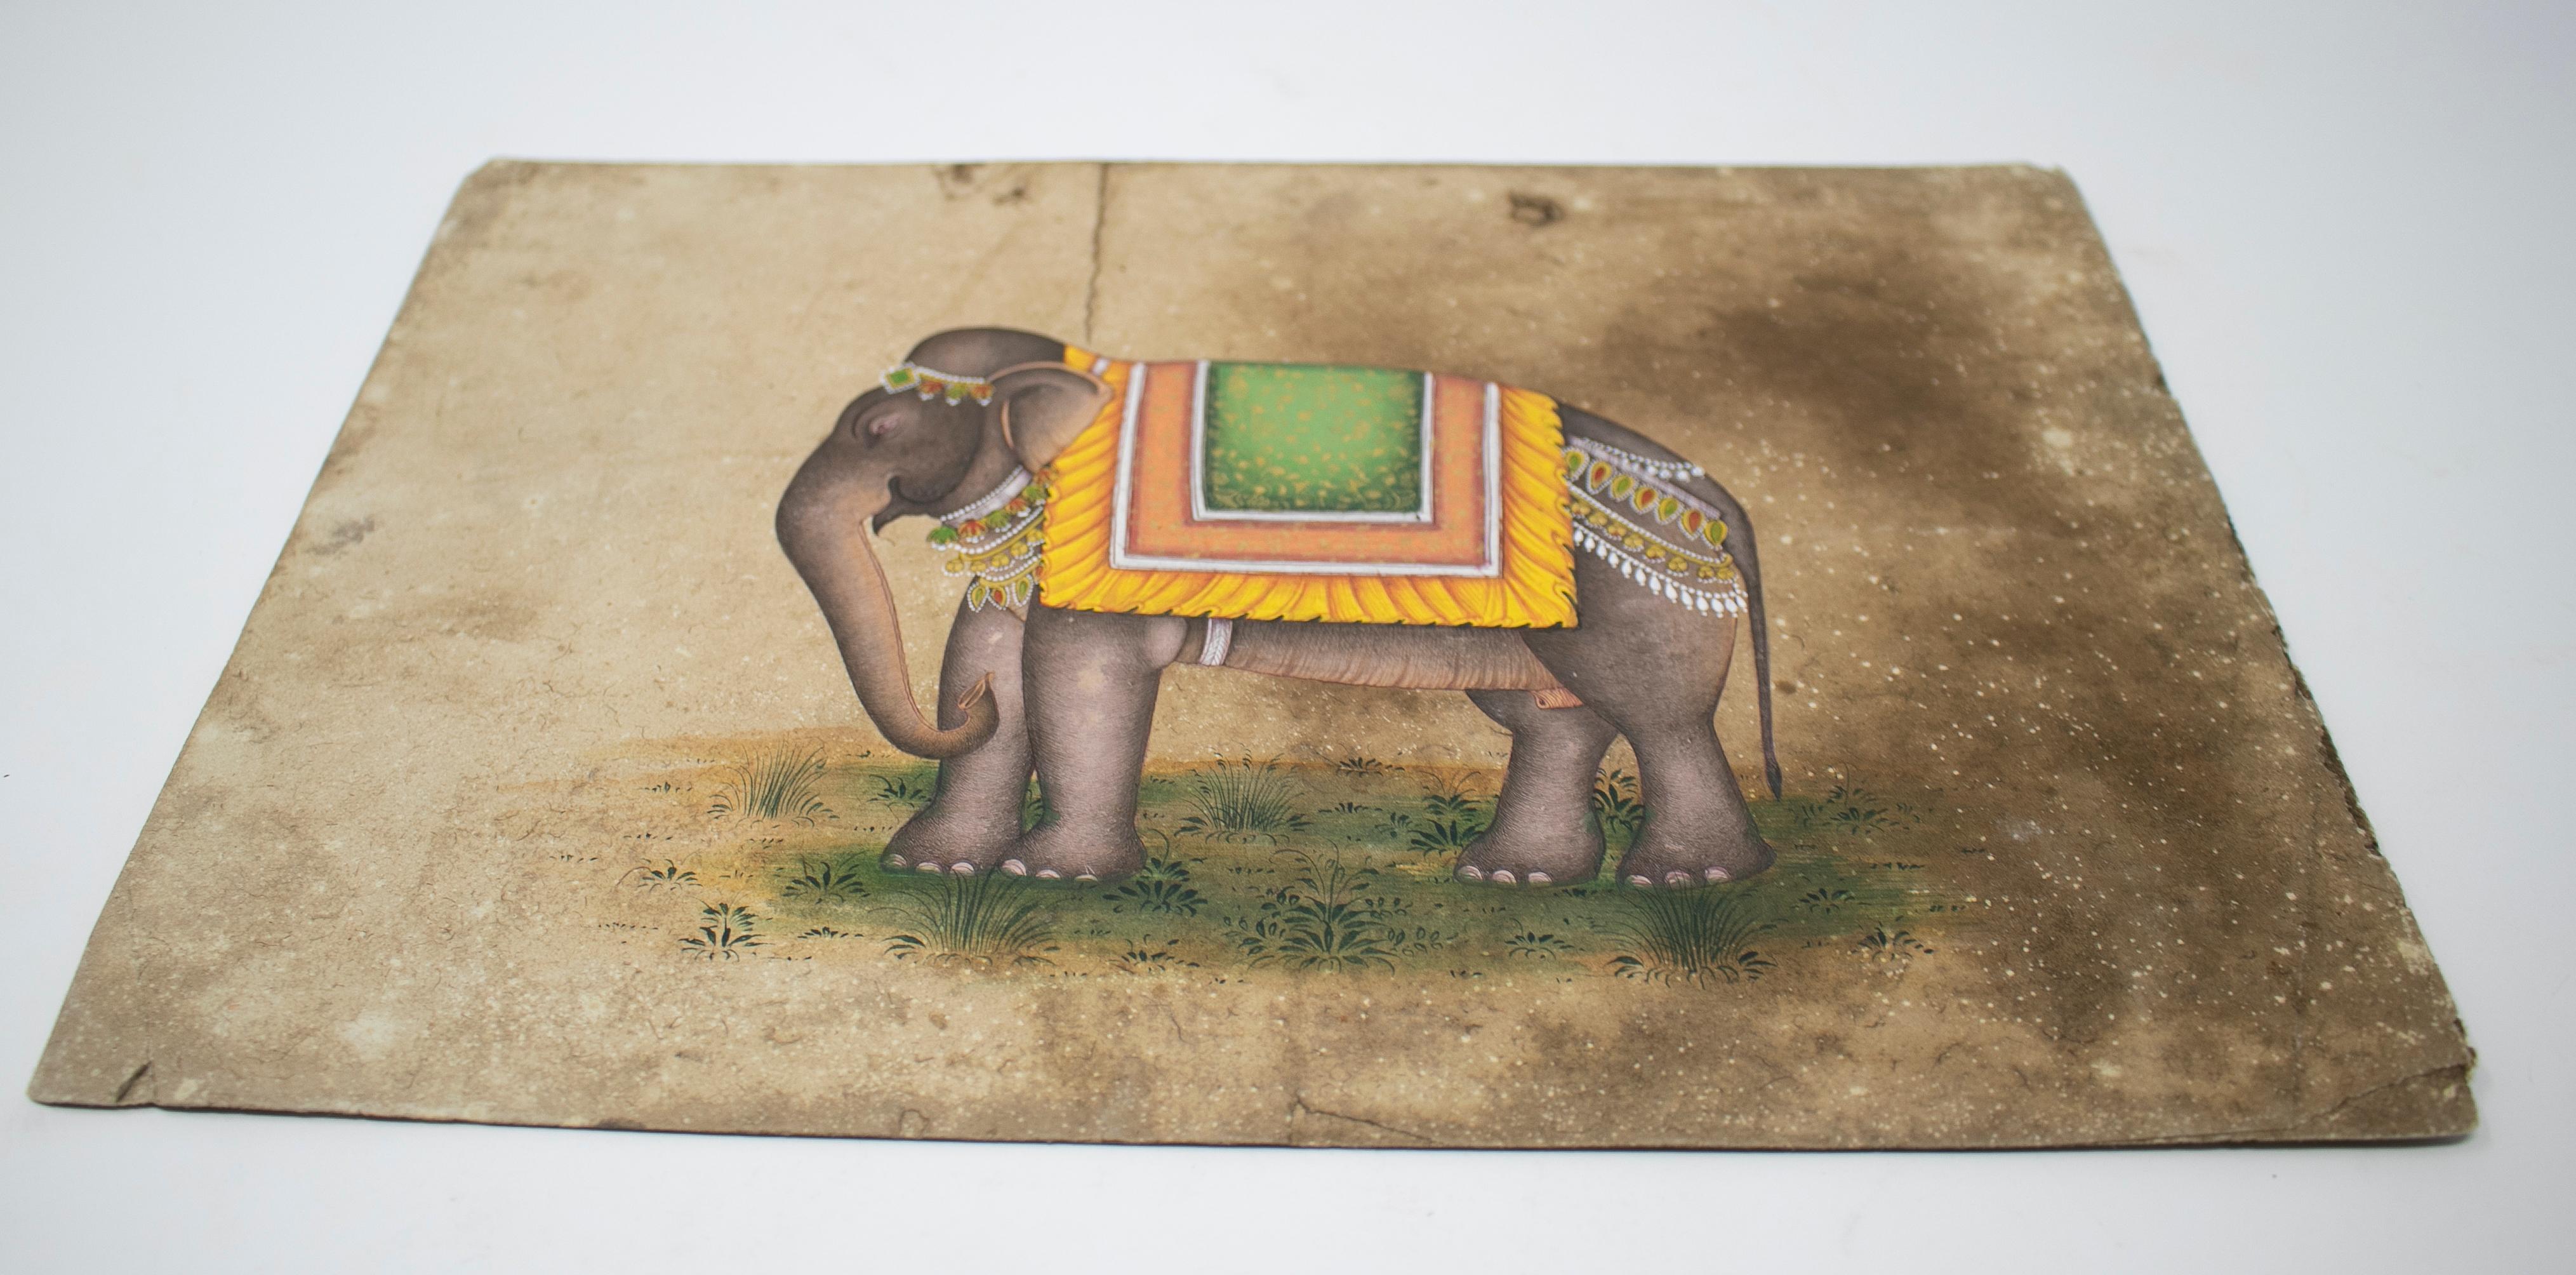 1970s Indian paper drawing of an elephant, part of a large private collection.